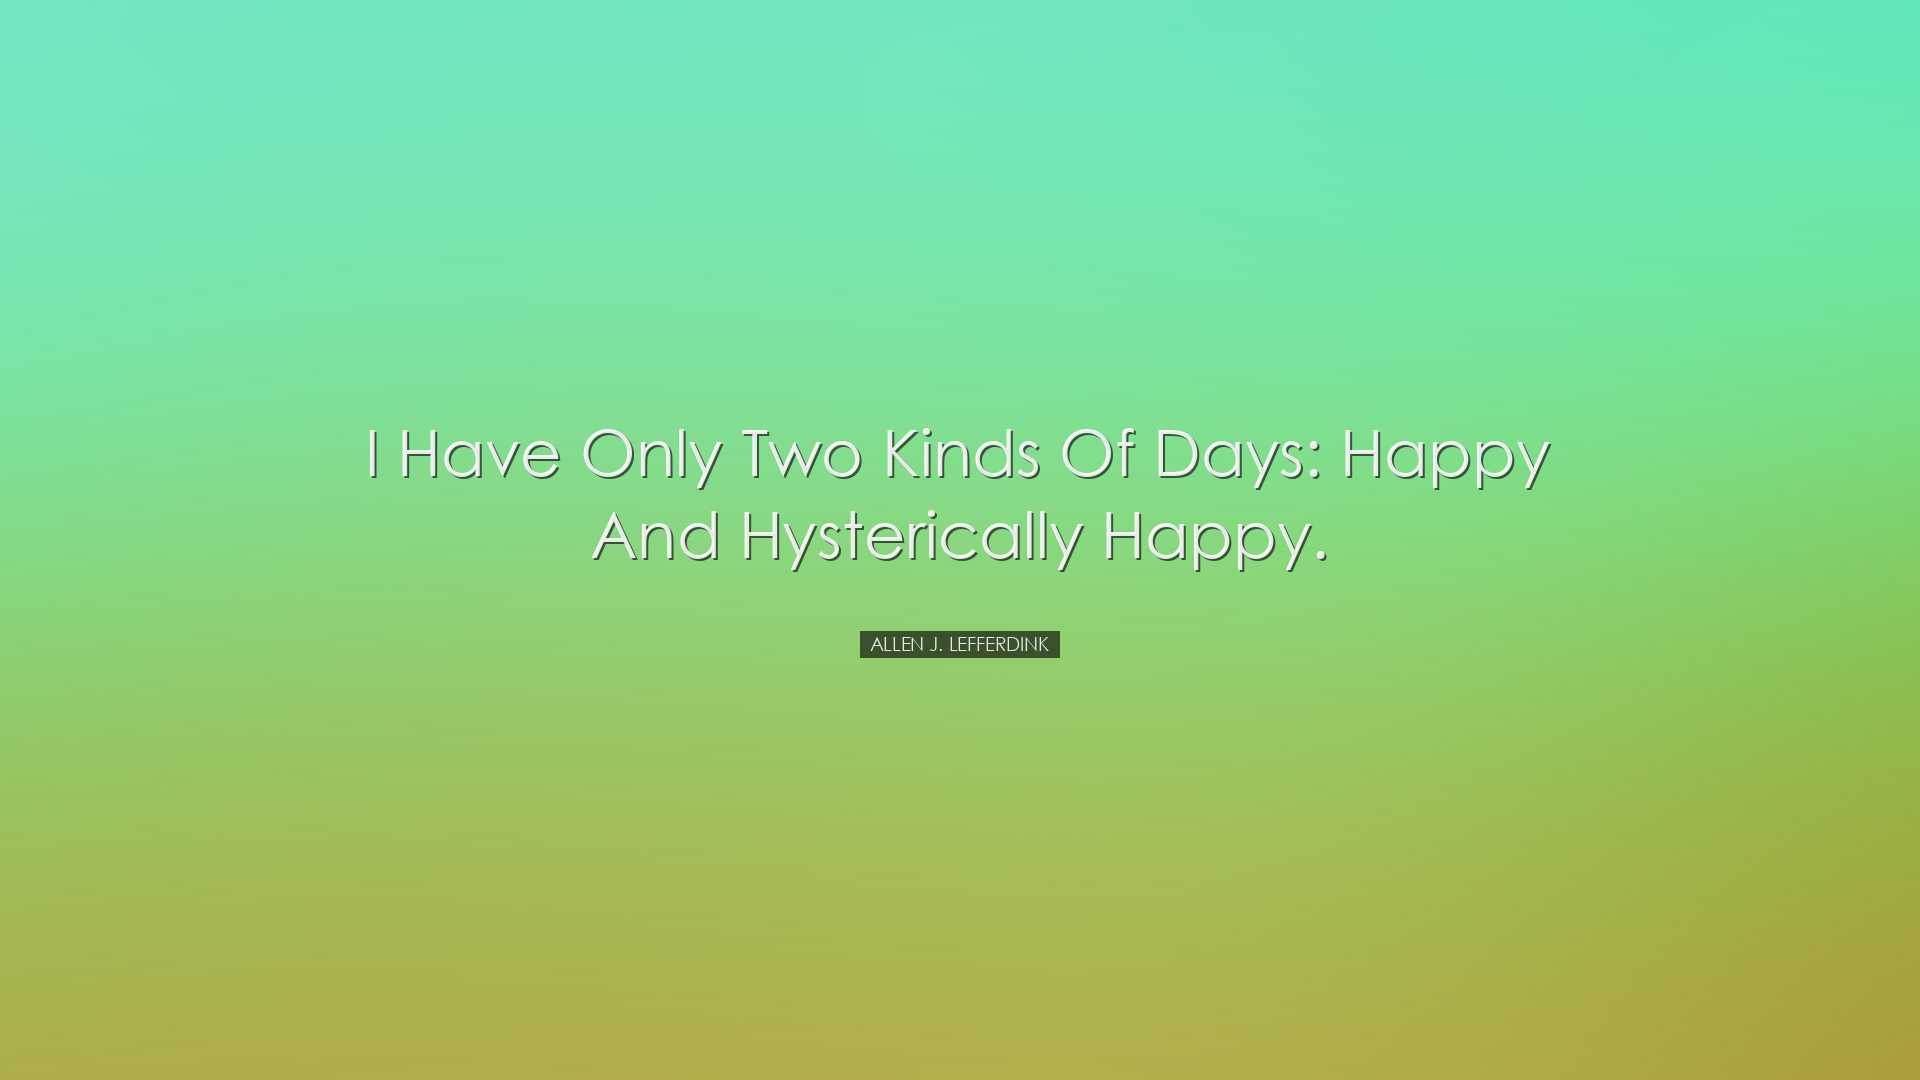 I have only two kinds of days: happy and hysterically happy. - All